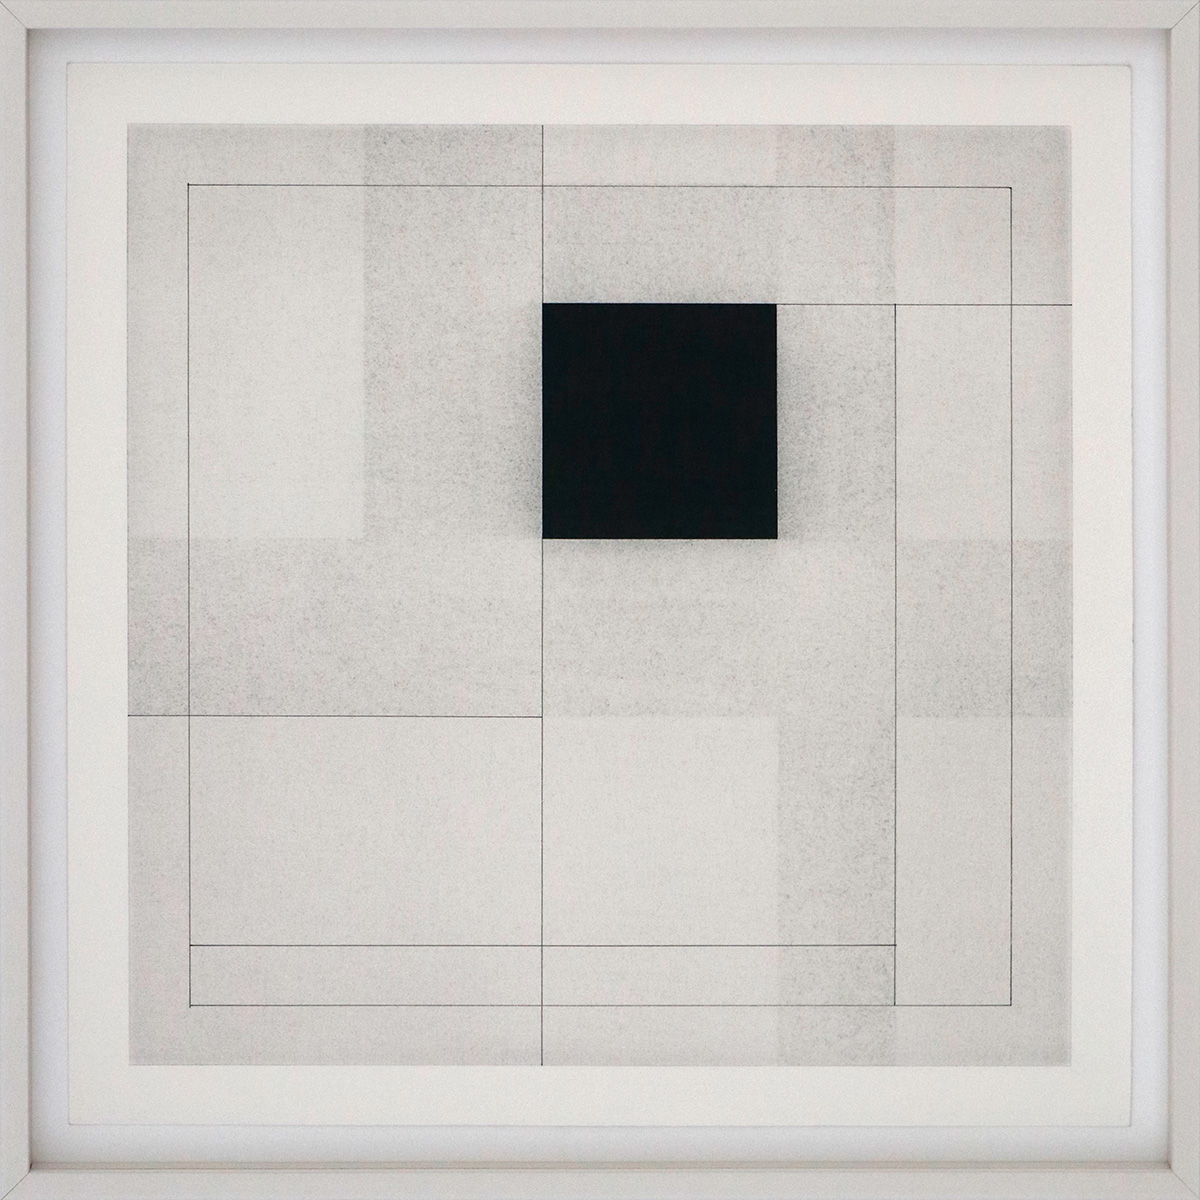 p.m. II/6, 200340 x 40 cm in 51 x 51 cmCharcoal and ink on paper; framed, museum glass 